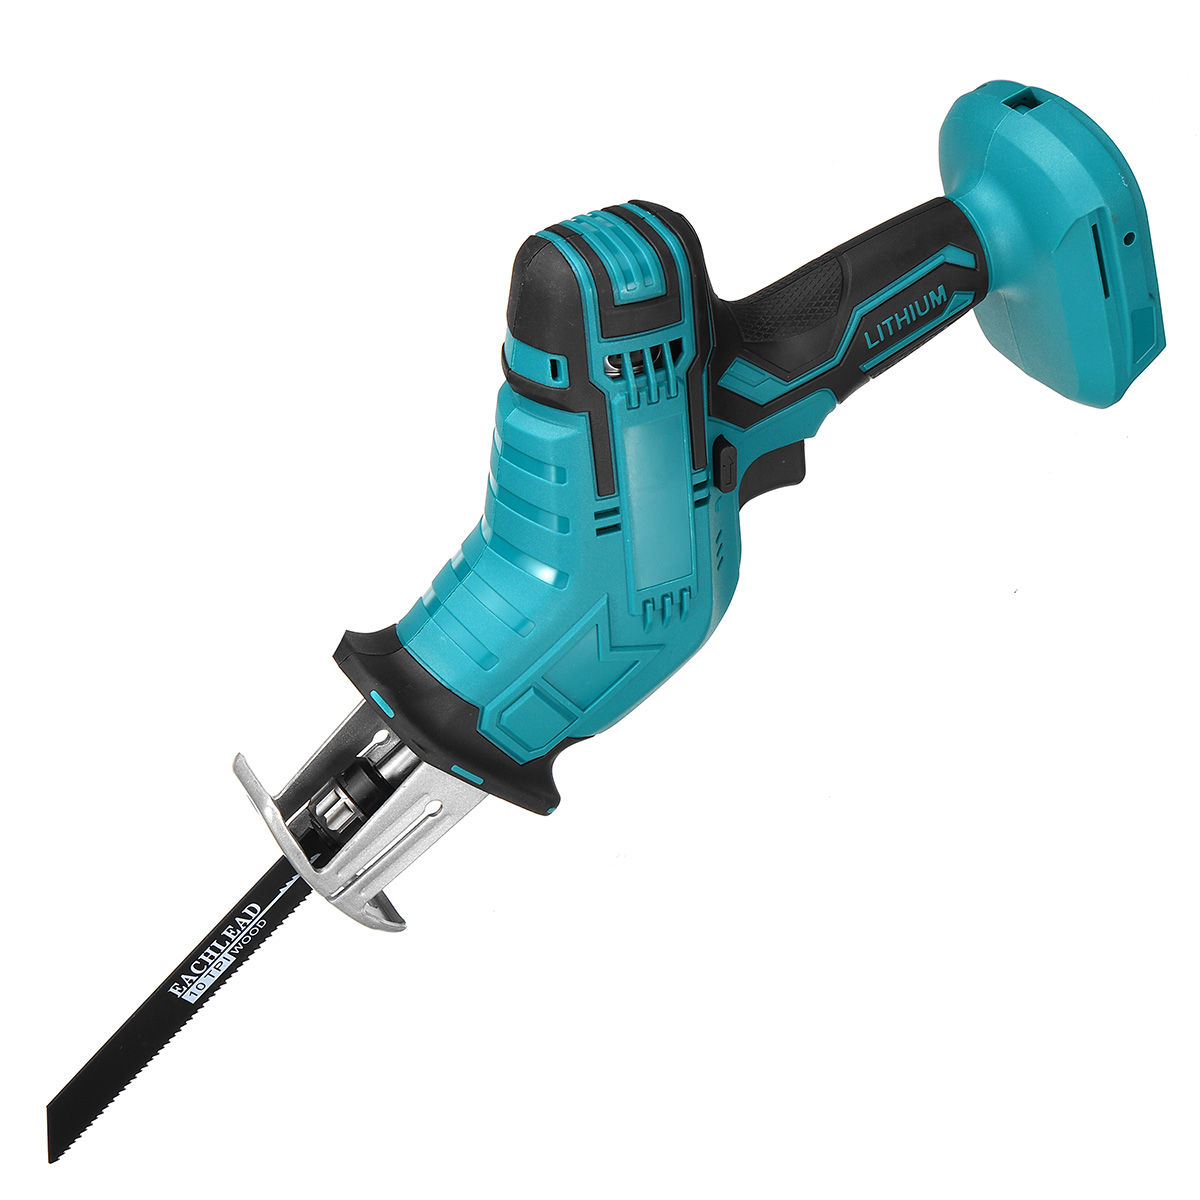 18V-Cordless-Electric-Reciprocating-Saw-Variable-Speed-Metal-Wood-Cutting-Tool-Saber-Saw-W-12X-Blade-1723641-8